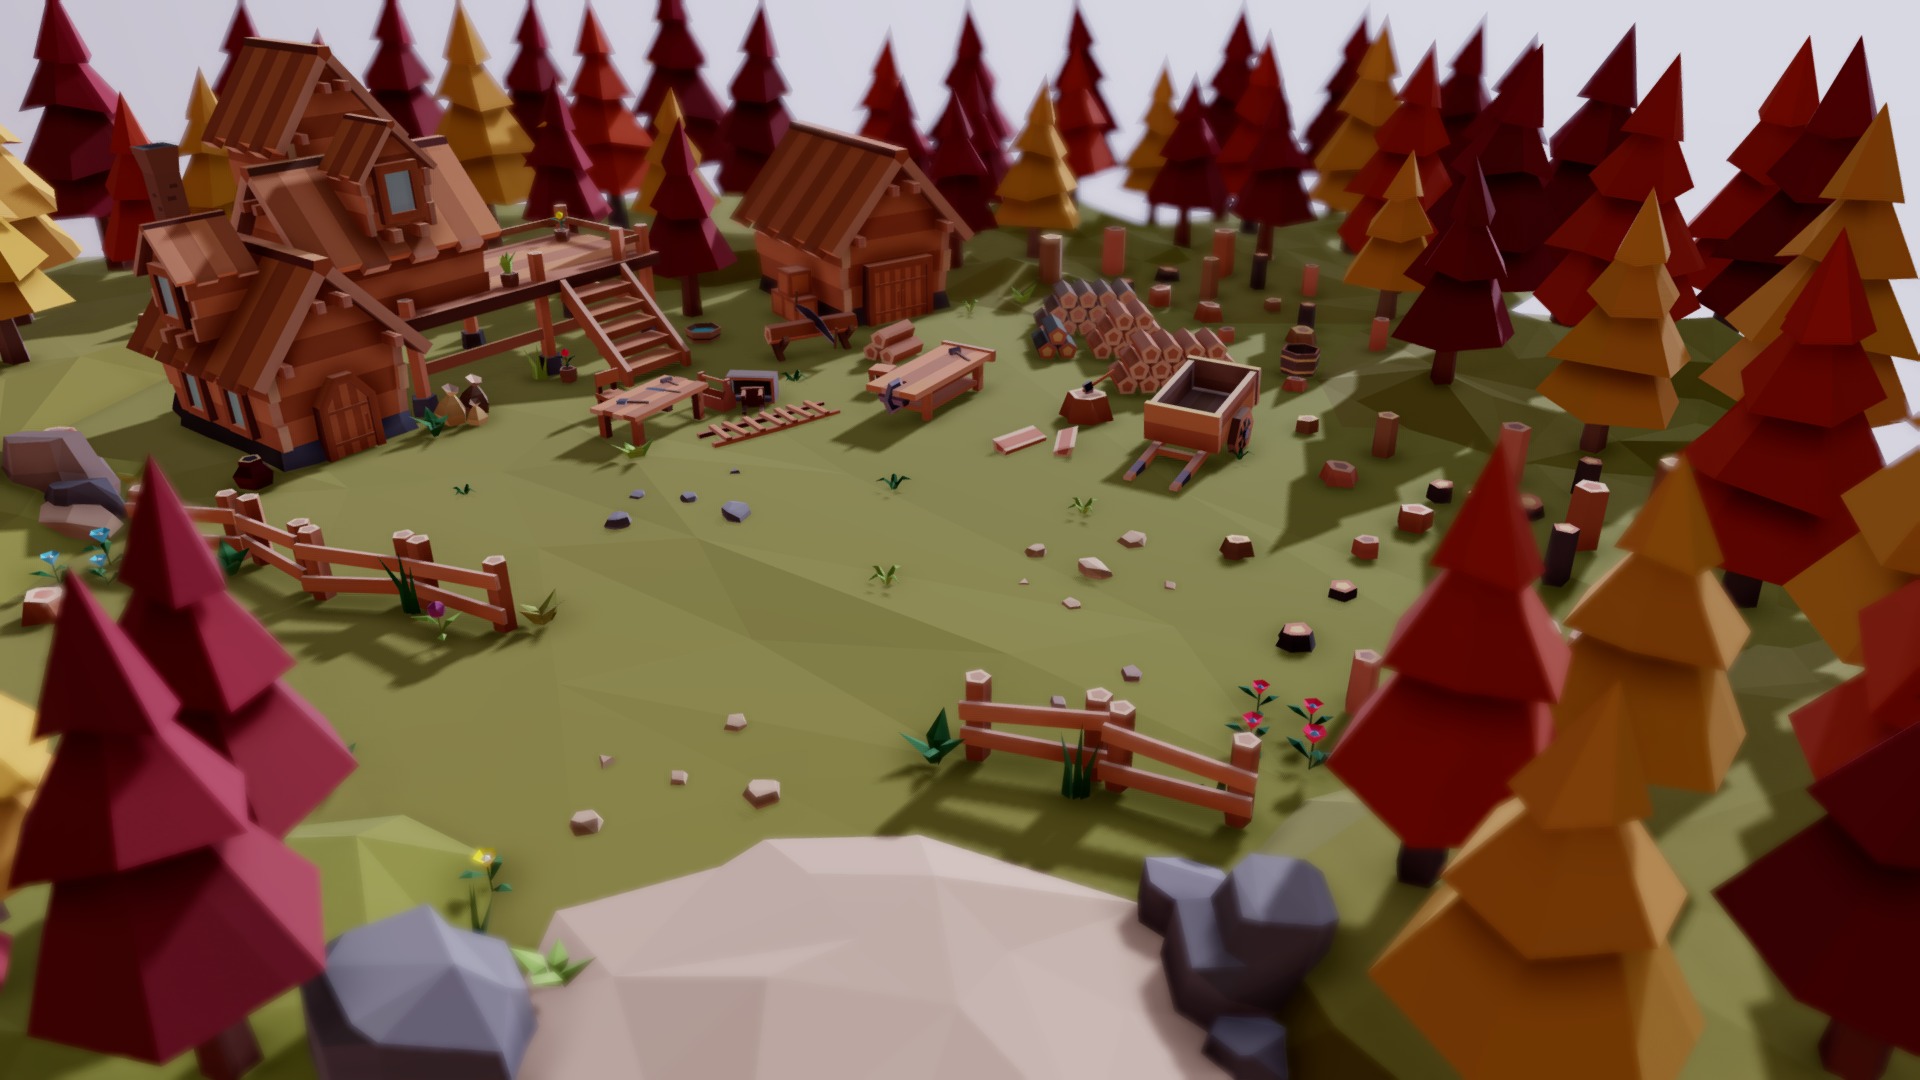 Tarbo - Fantasy Village
A low poly asset pack of Fantasy themed polygonal style game.
Modular parts are easy to piece together in a variety of combinations.
This product is designed to TopDown, RPG, Adventure, RTS.
You can create beautiful, diverse villages of your own.


Download

FEATURES



485 Useful prefabs

3 Color themes (6 colors with snow version) + 1 autumn version

57 Modular building parts

37 Premade buildings

26 Grounds

216 Props

149 Environment objects

11 Scenes in Various Styles

Lightmap Support

Simple polygonal style

Optimized meshes useful for mobile, AR, VR, PC

Works in Unity 2019.4 and above

Support Universal Render Pipeline (URP)


UPDATES &amp; NEWS



WEBSITE
 - Fantasy Village "Lumbermill Autumn" - 3D model by Tarbo Studios (@tarboStudios) 3d model